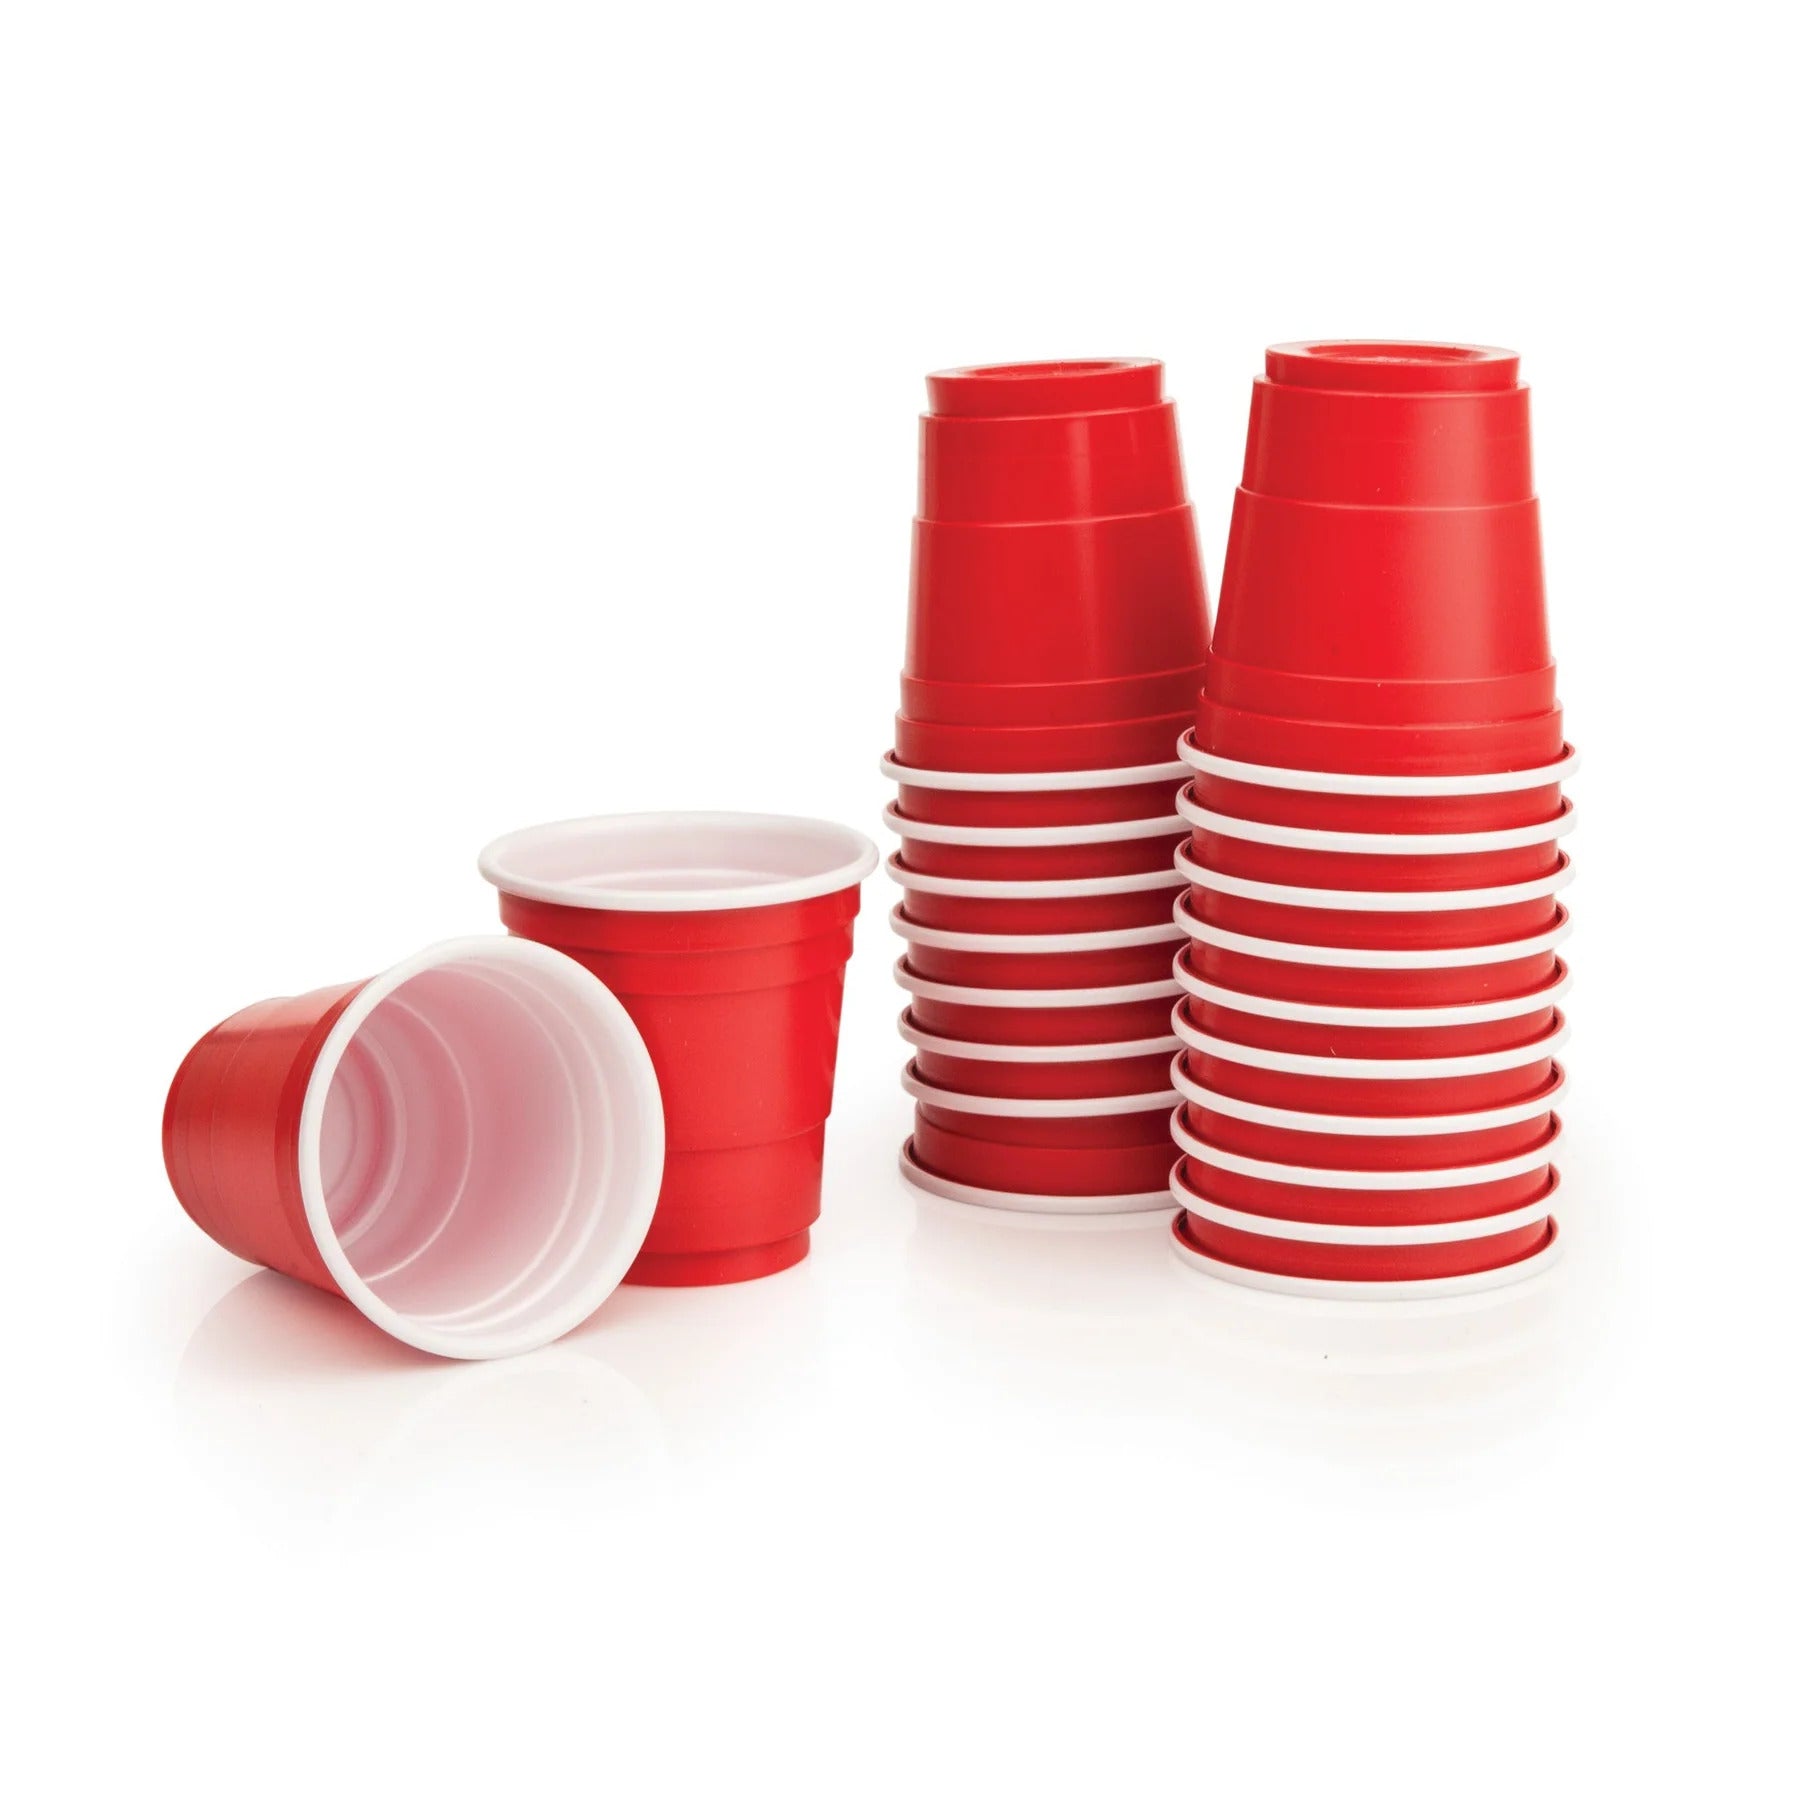 D'eco Reusable Stainless Steel Red Party Cups - 10 Pack